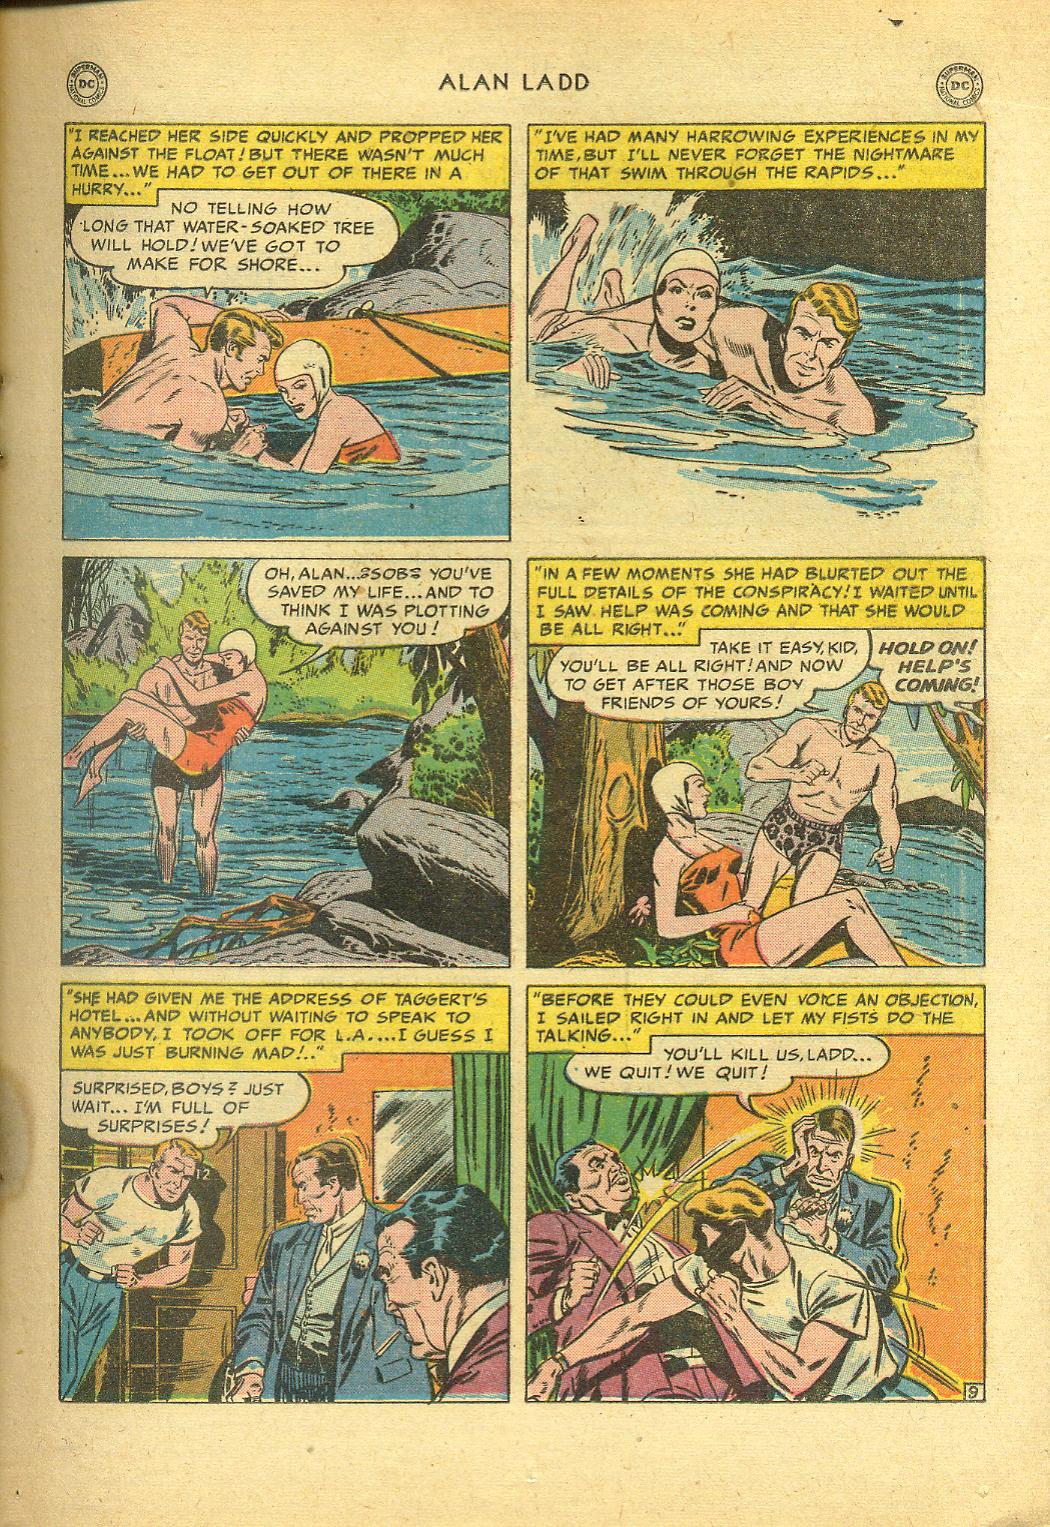 Read online Adventures of Alan Ladd comic -  Issue #3 - 23